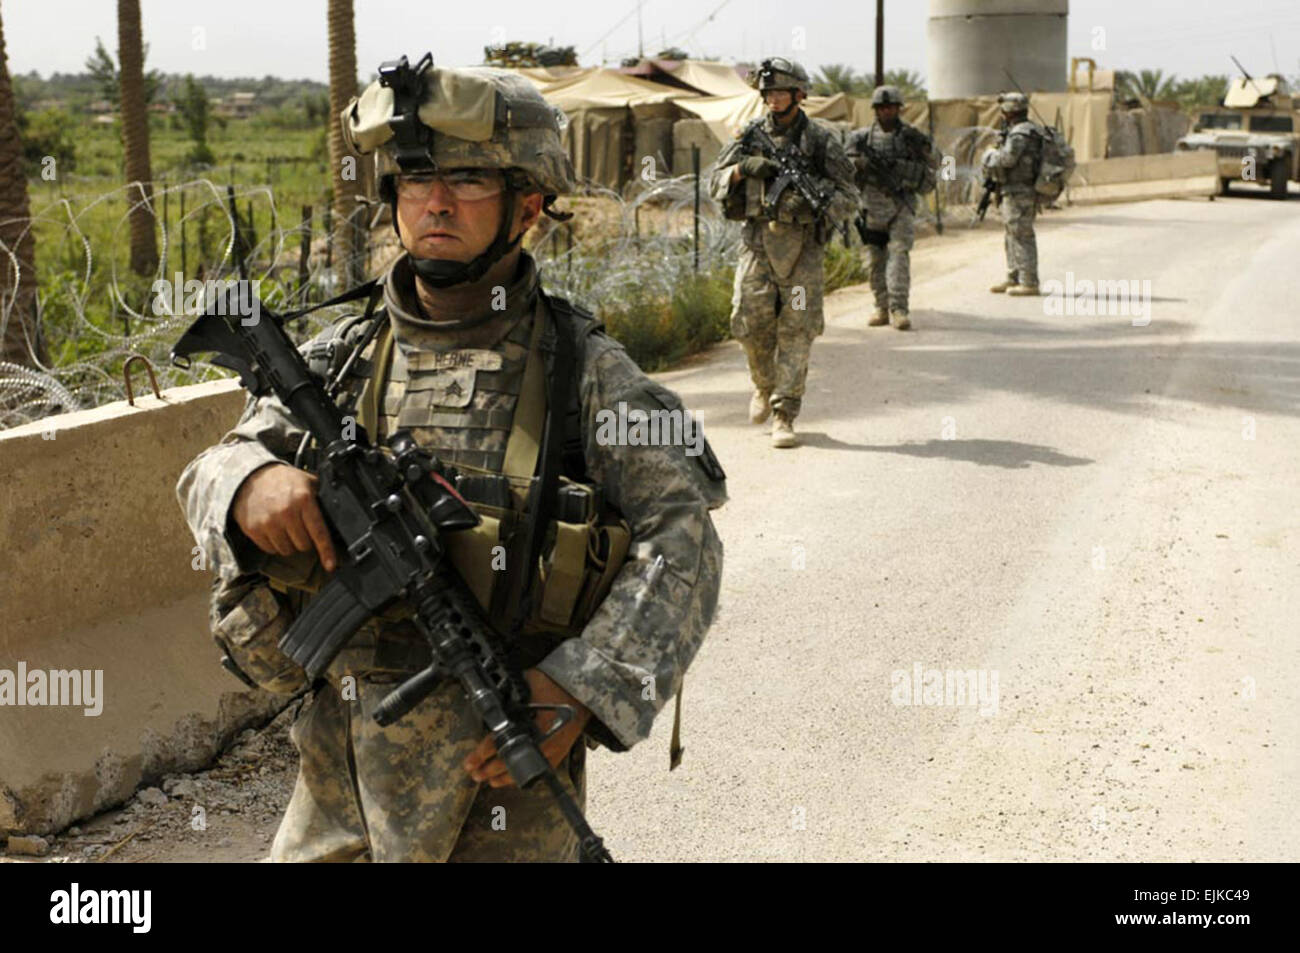 U.S. Army Soldiers attached to the 4th Battalion, 31st Infantry Regiment search for three missing Soldiers in the streets of Yusifiyah, Iraq, May 14, 2007.  Staff Sgt. Dennis J. Henry Jr. Stock Photo